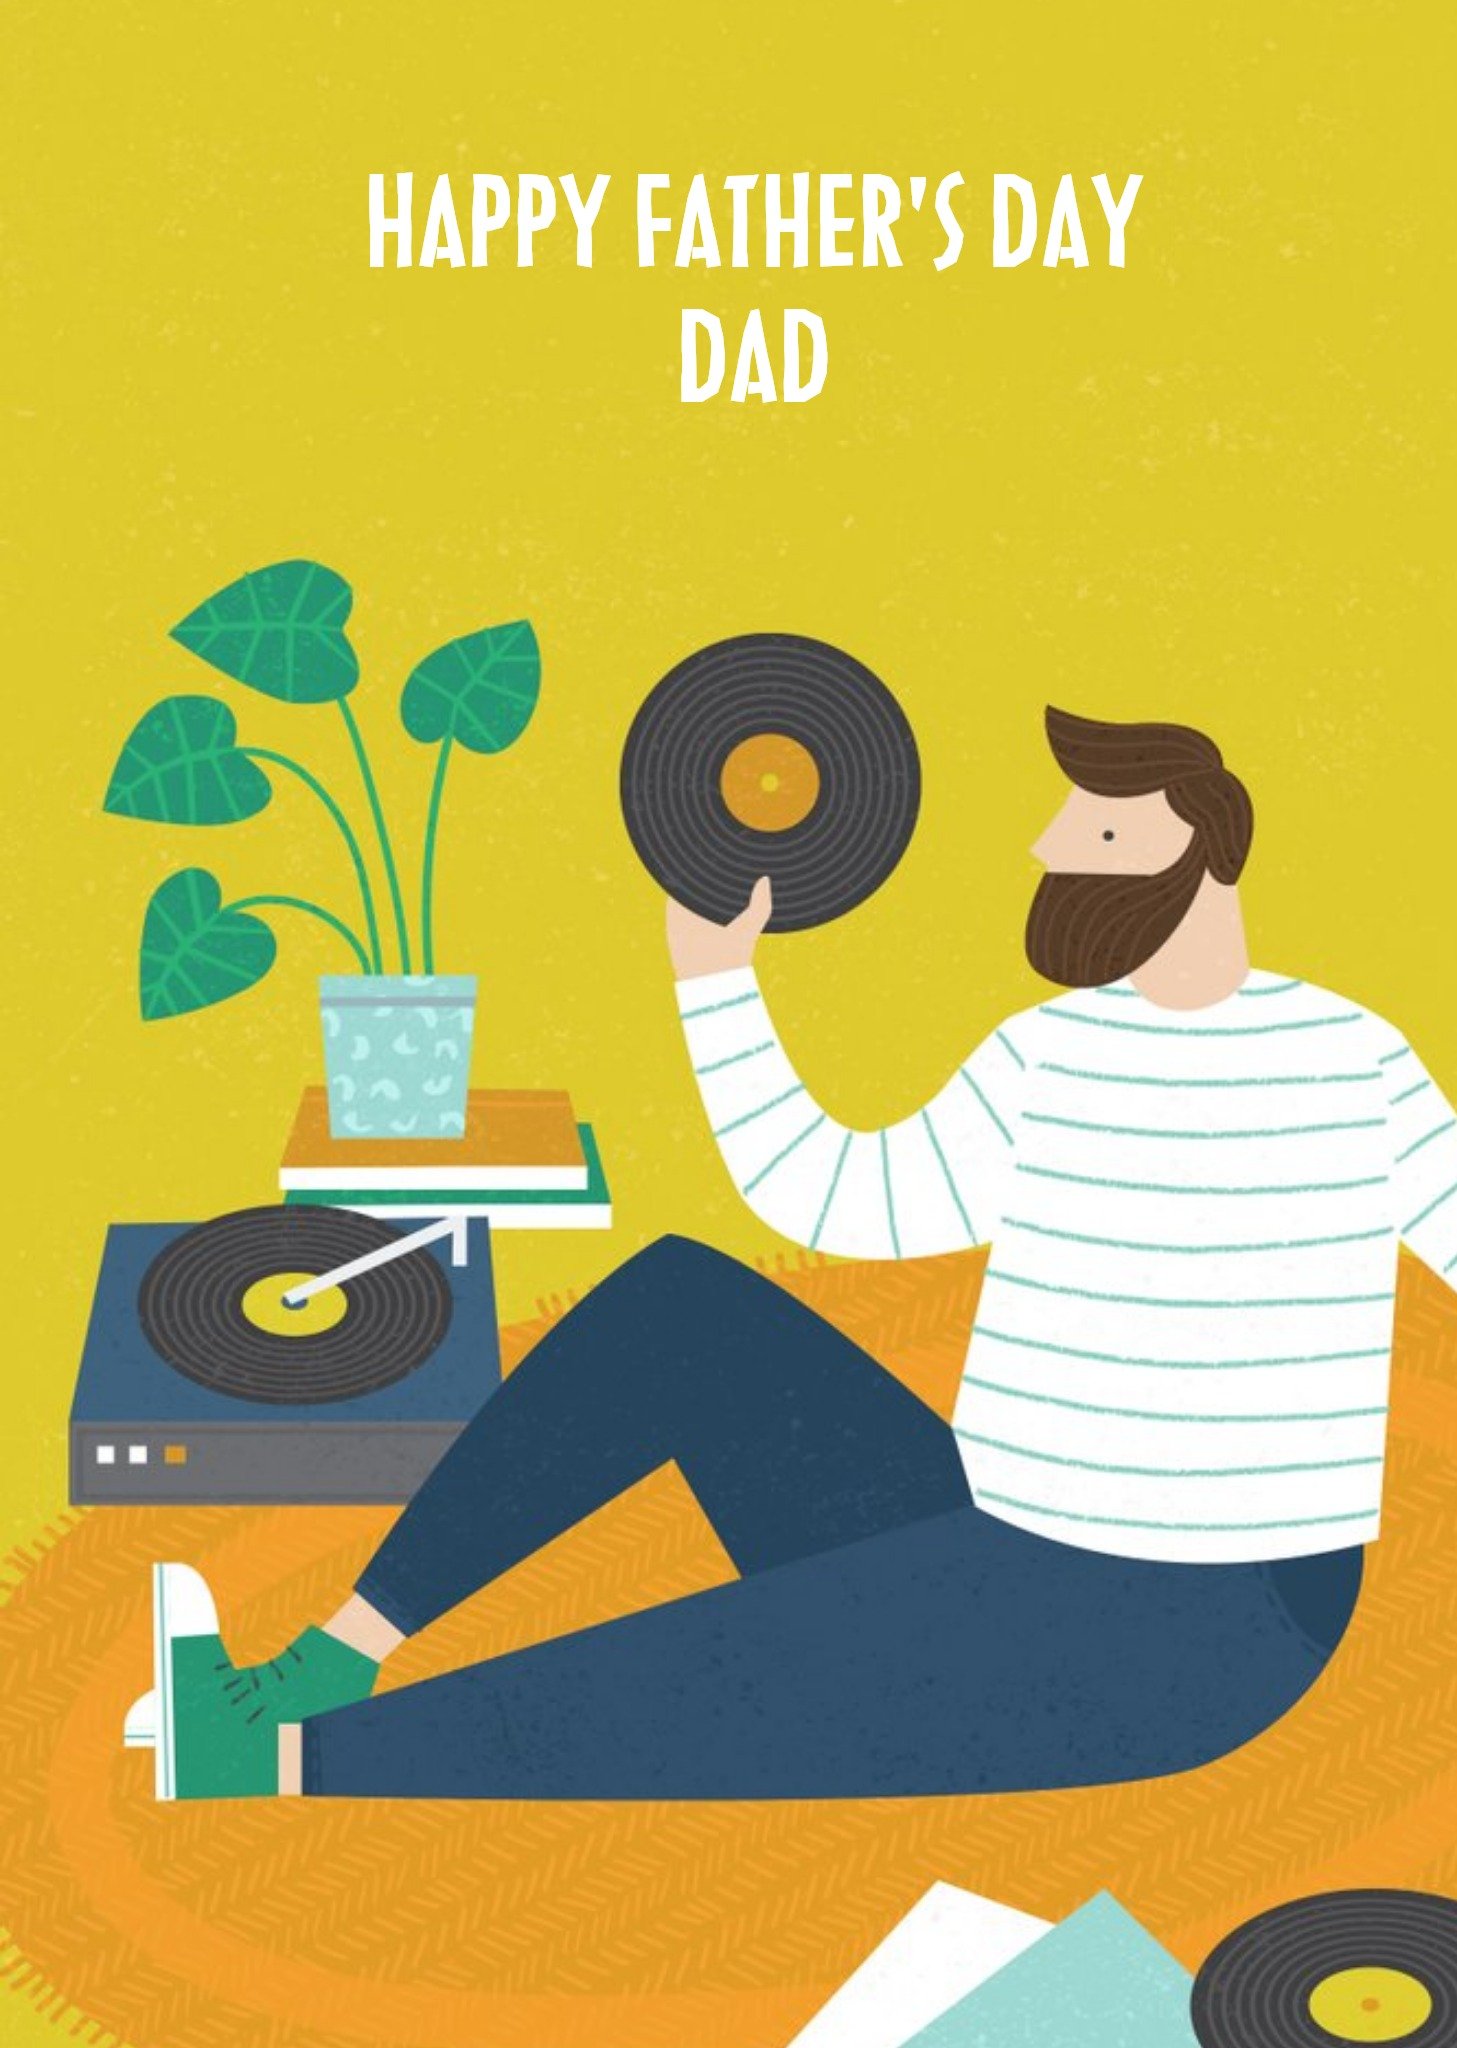 Moonpig Colourful & Bright Vinyl Record Playing Dad Father's Day Card Ecard